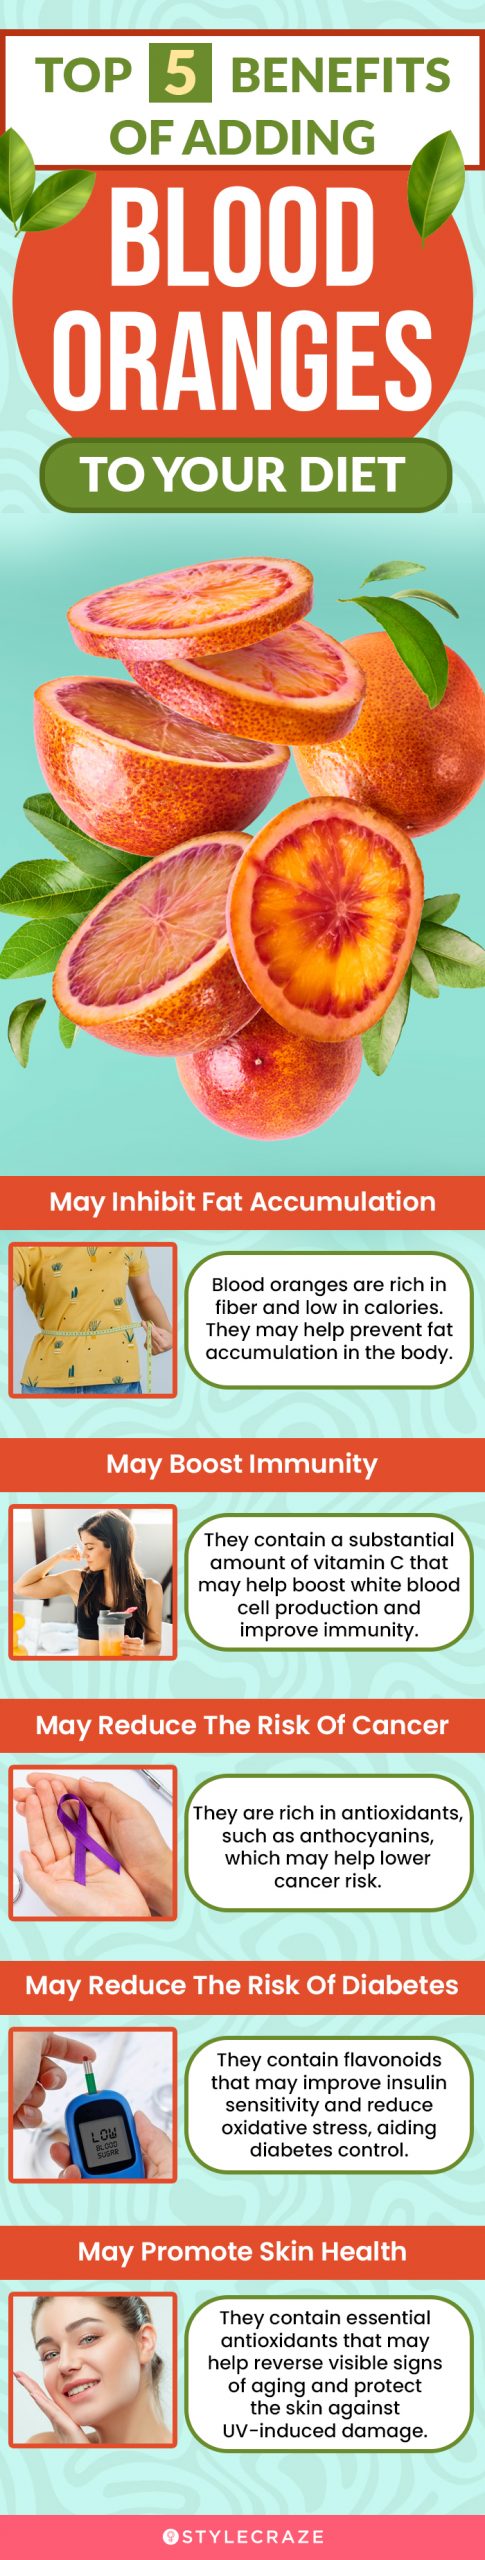 top 5 benefits of adding blood orange to your diet (infographic)